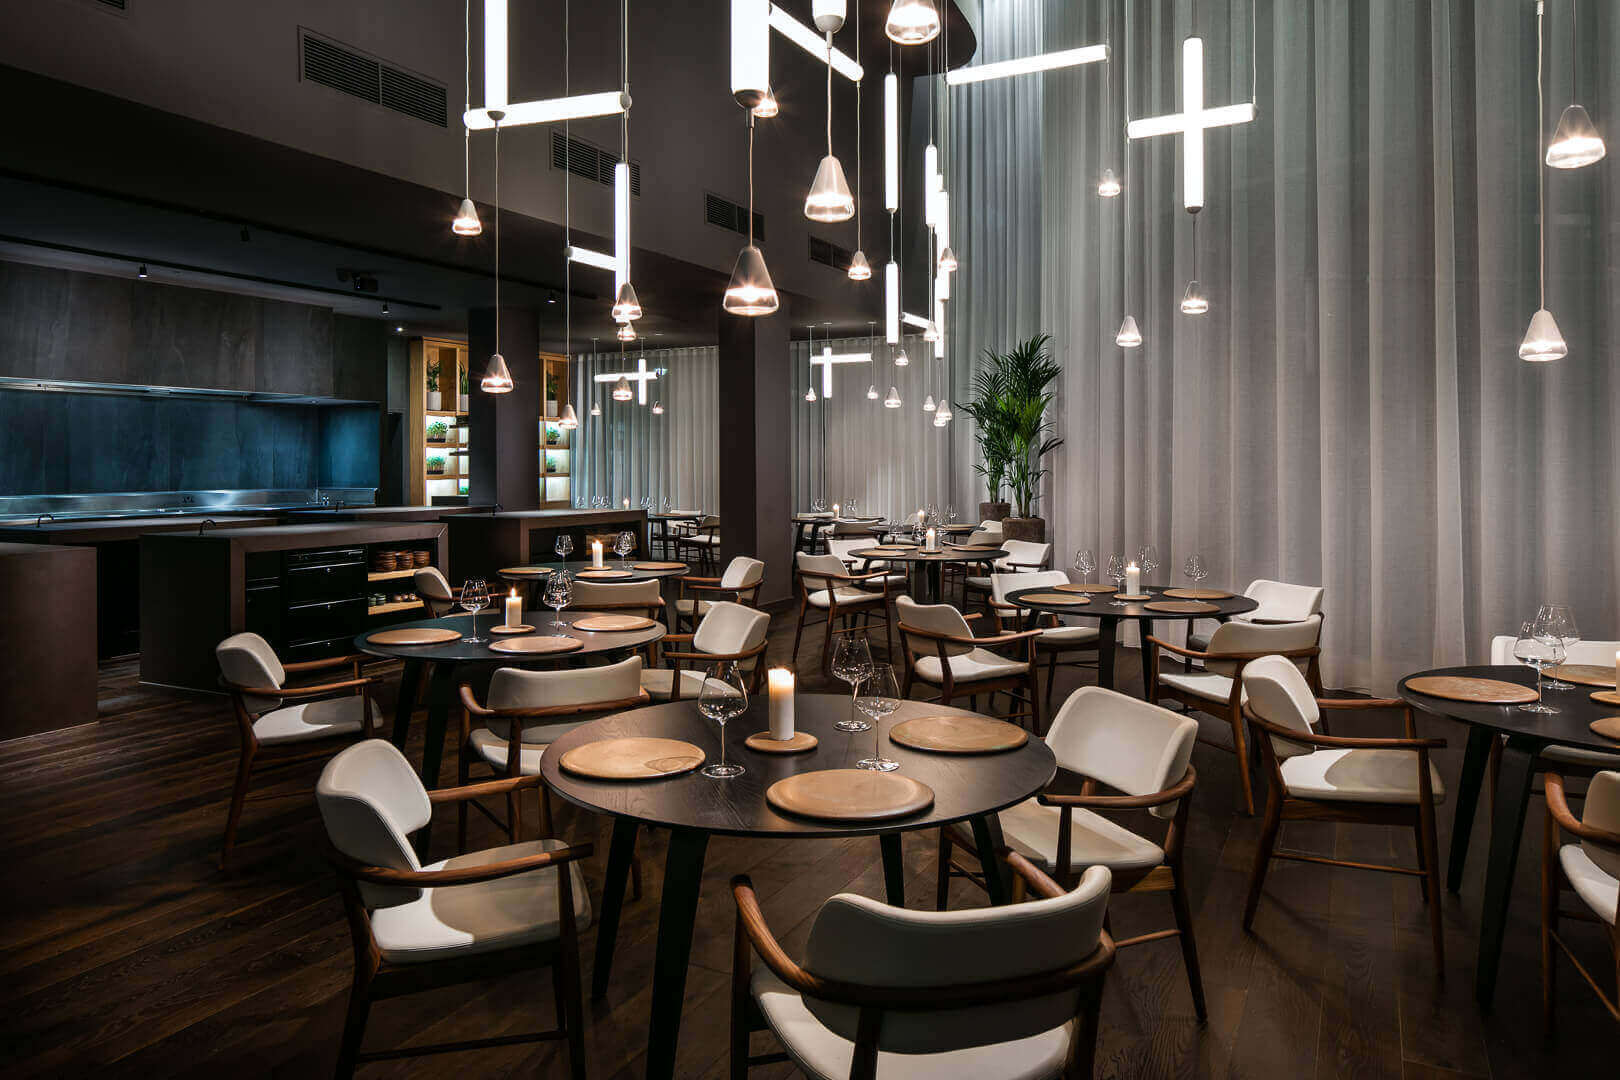 Commercial Architecture, Interiors & Aerial Photography - Restaurant refurbishment at Mana, Manchester